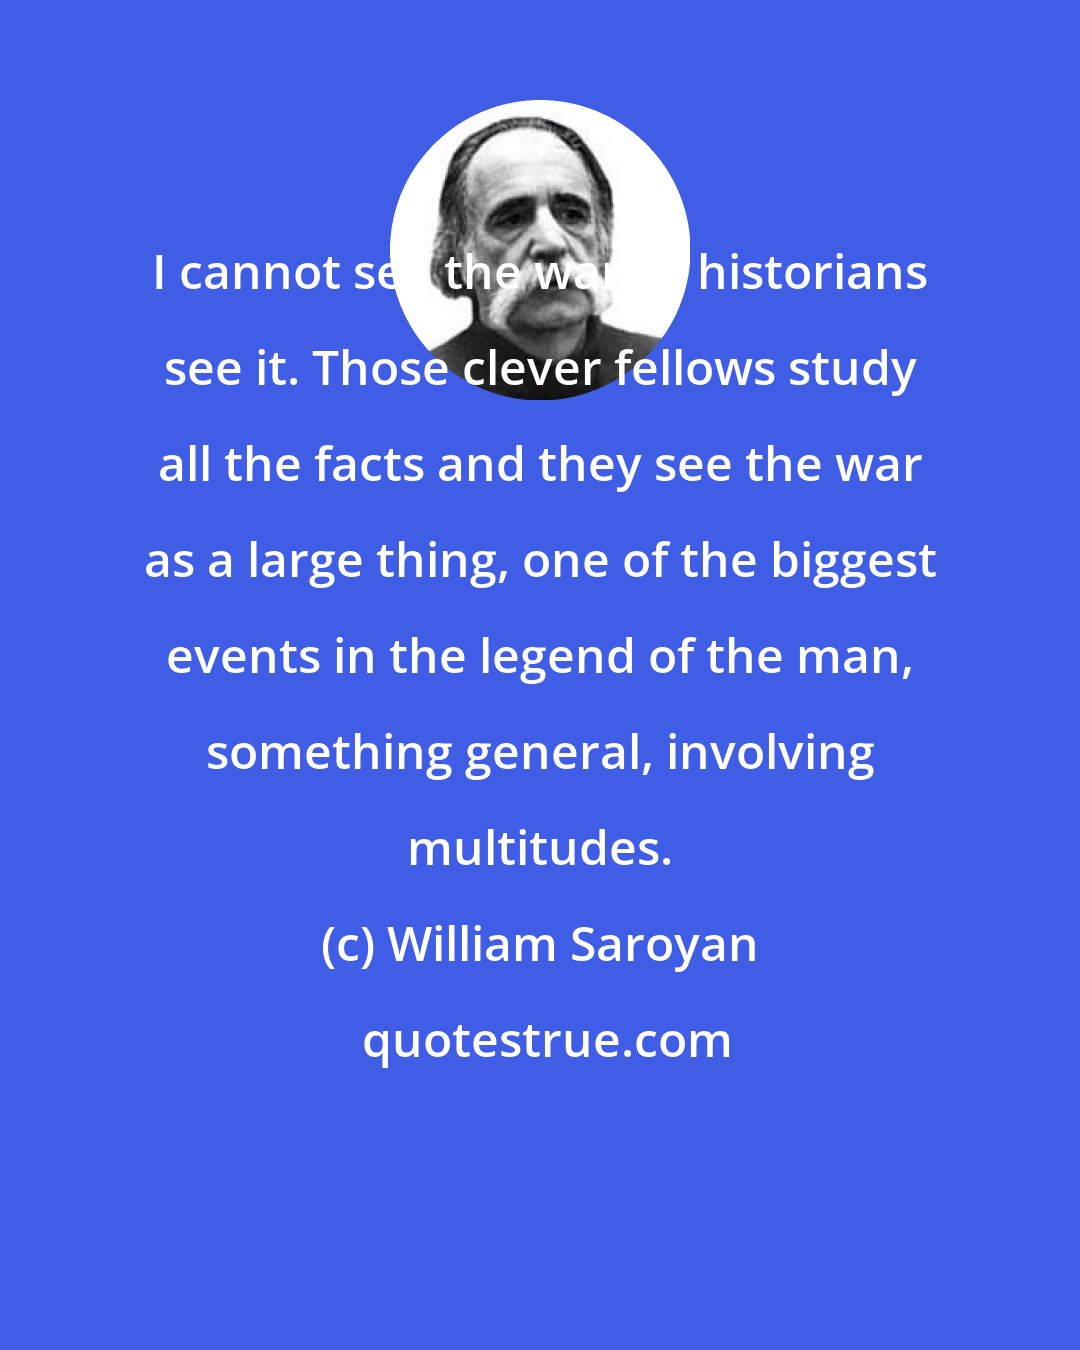 William Saroyan: I cannot see the war as historians see it. Those clever fellows study all the facts and they see the war as a large thing, one of the biggest events in the legend of the man, something general, involving multitudes.